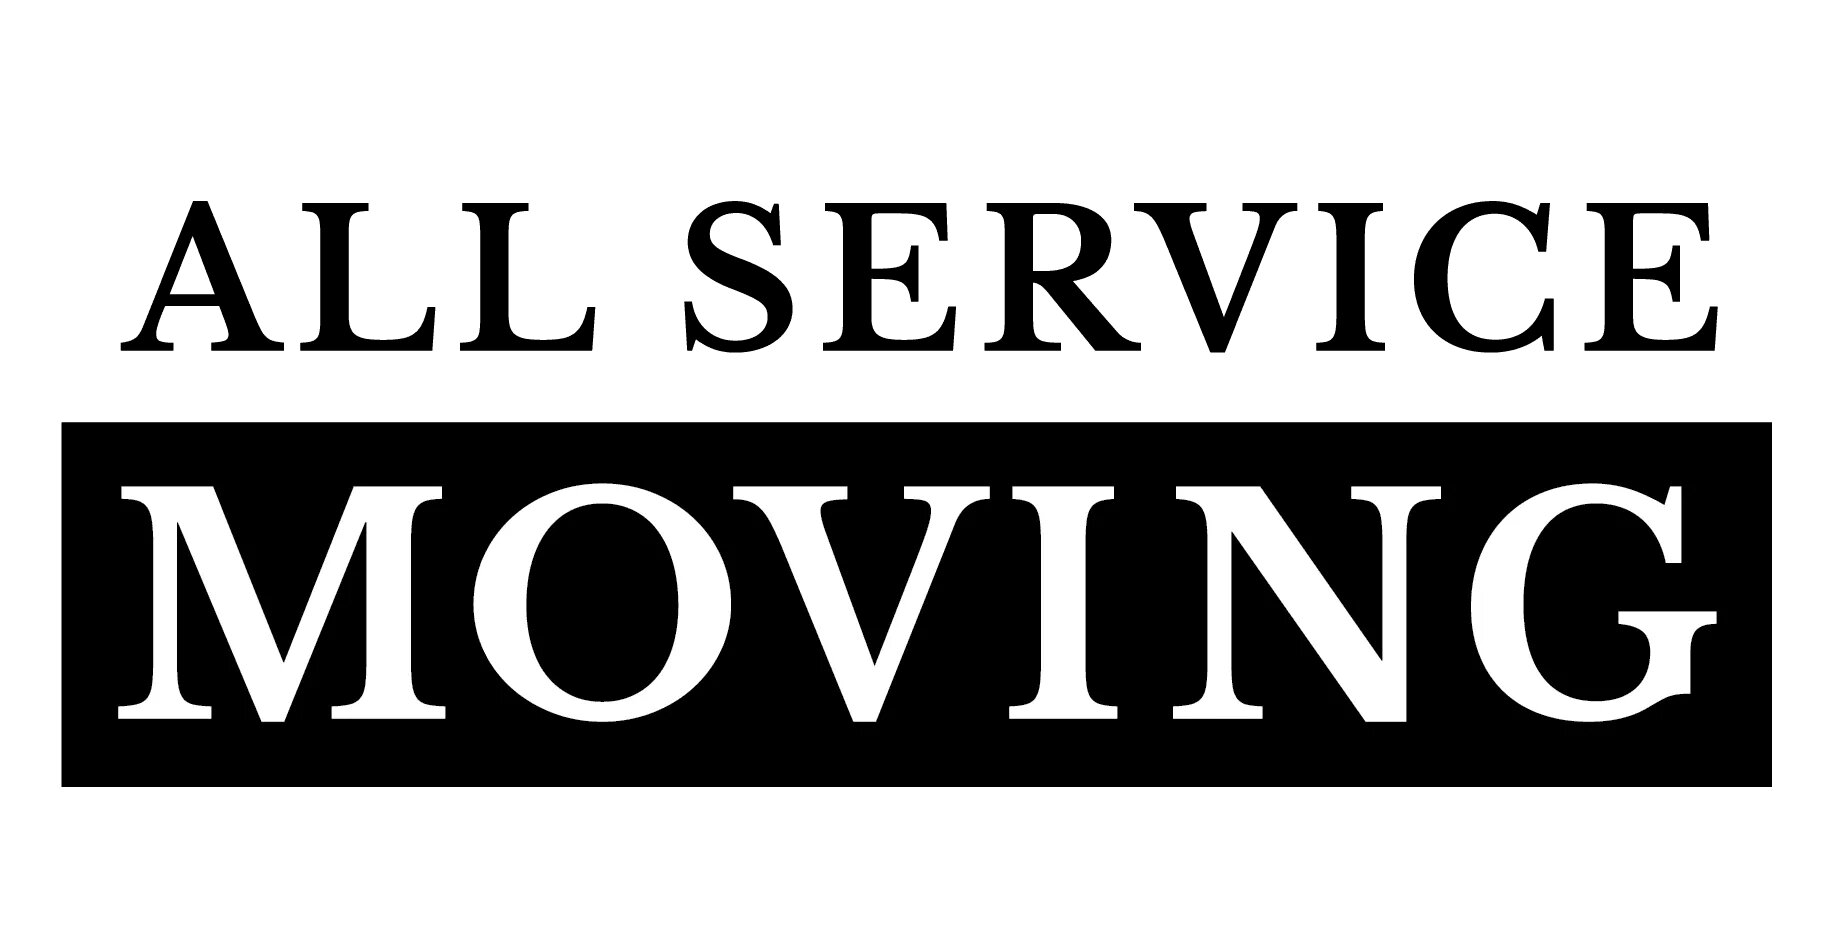 All Service Moving We Know Portland